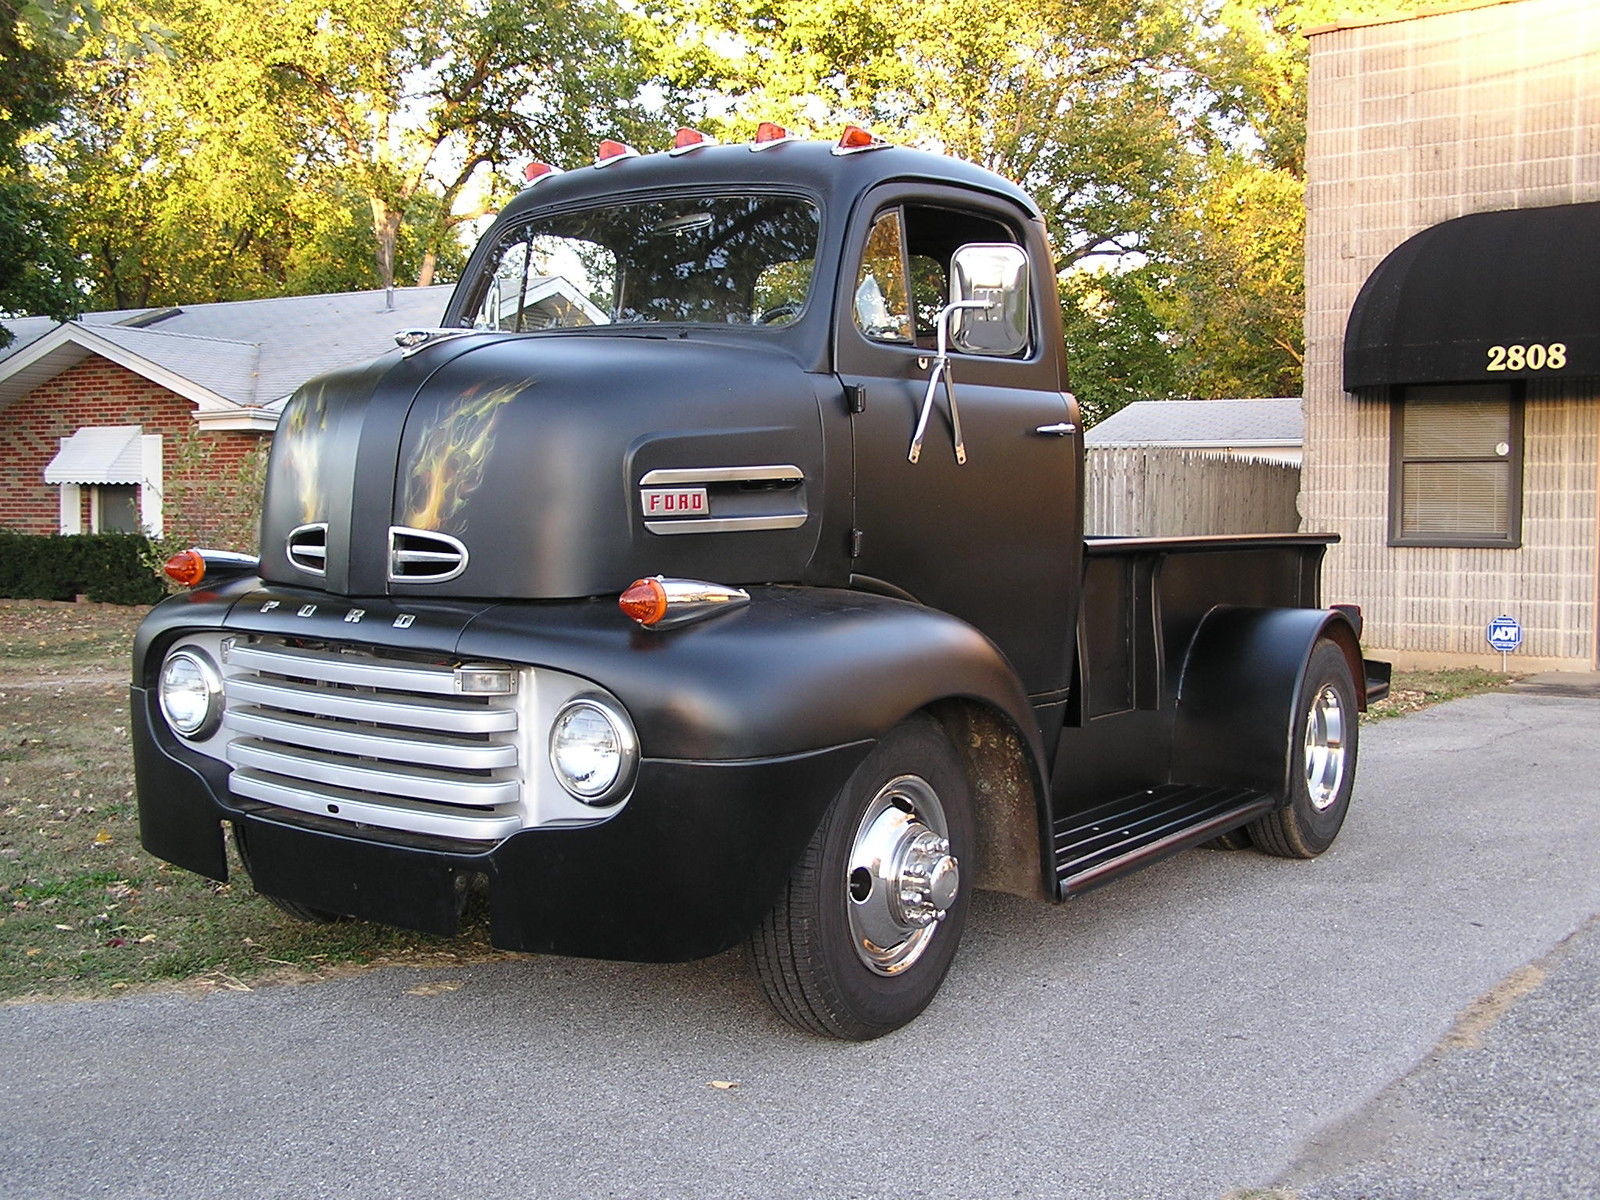 0 Be Cooler Than Anyone Else At Home Depot In This 1948 COE Ford Pickup - 0